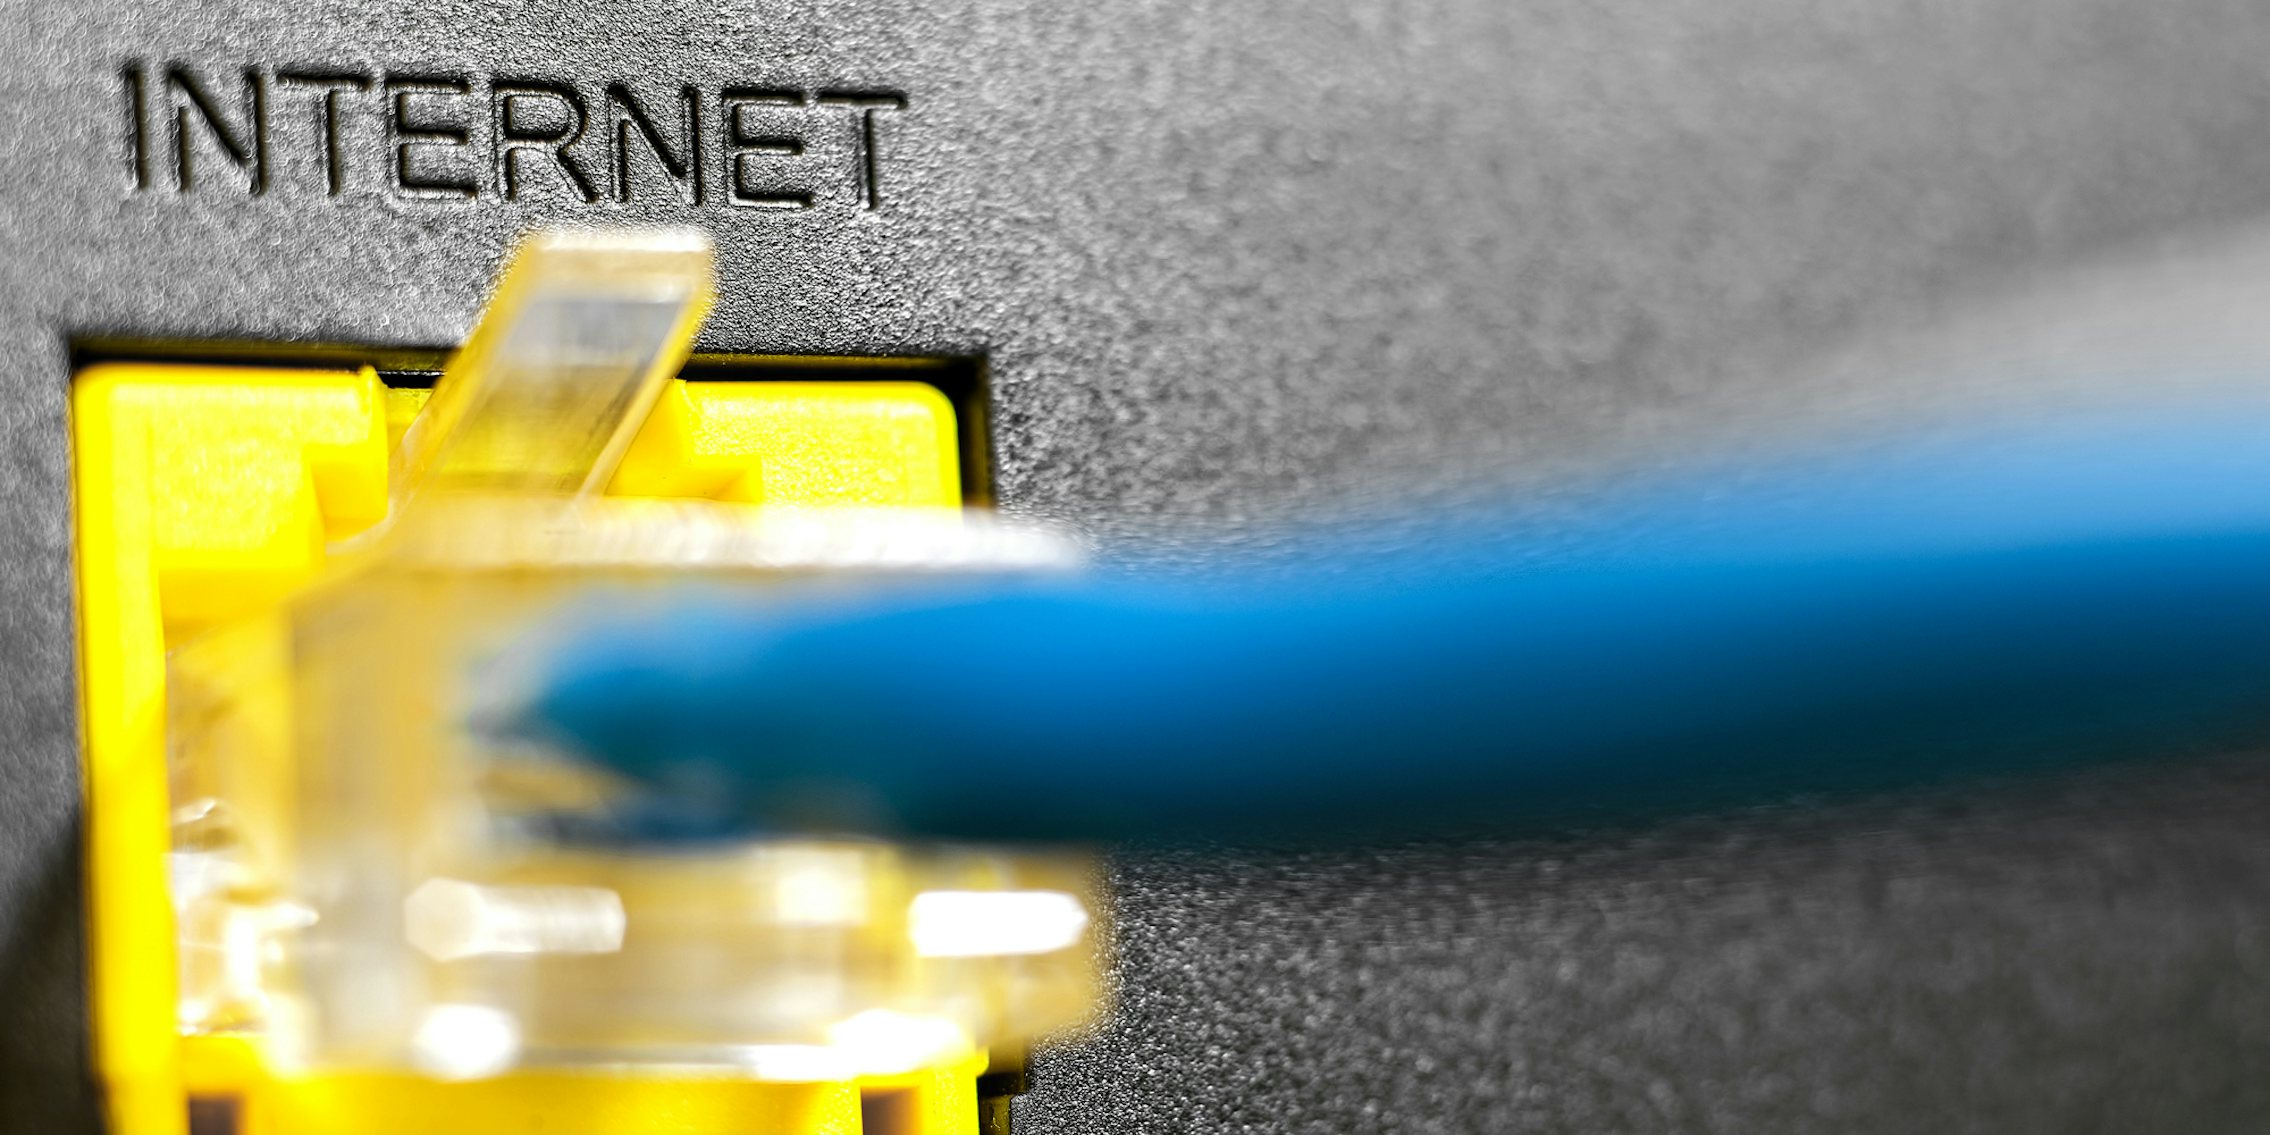 An ethernet cord delivering broadband internet to a router.